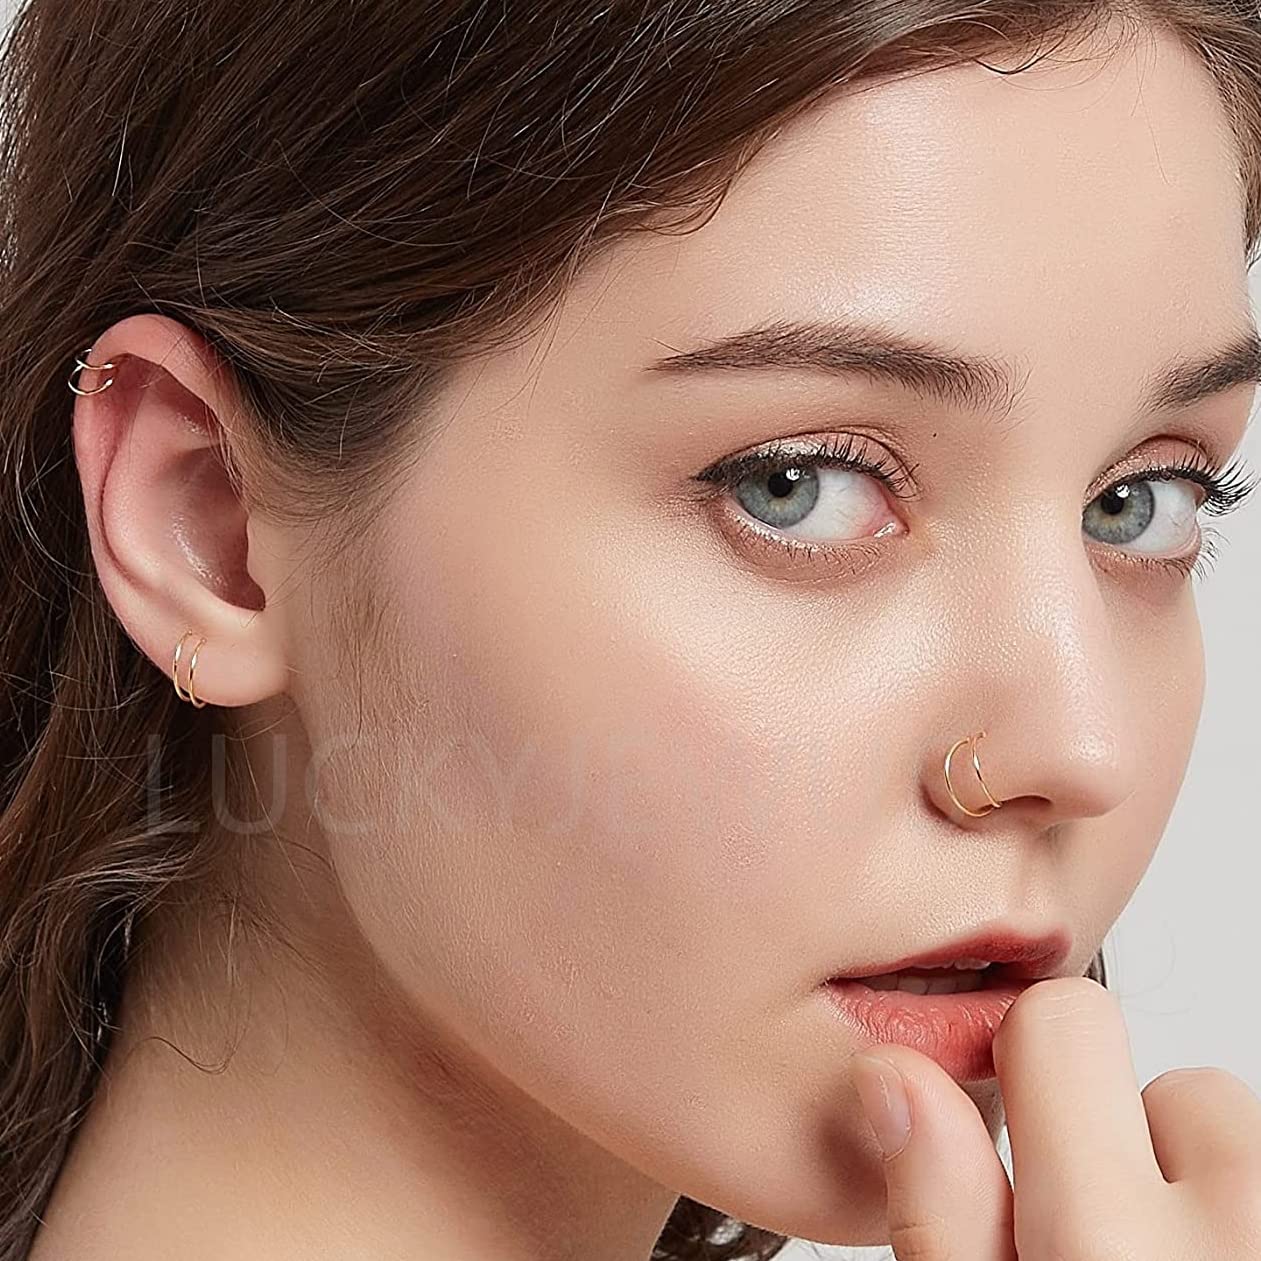 14k Gold Filled 20G Double Hoop Nose Ring for Single Piercing, 20 Gauge Small Thin 8mm Spiral Nose Jewelry for Women Men